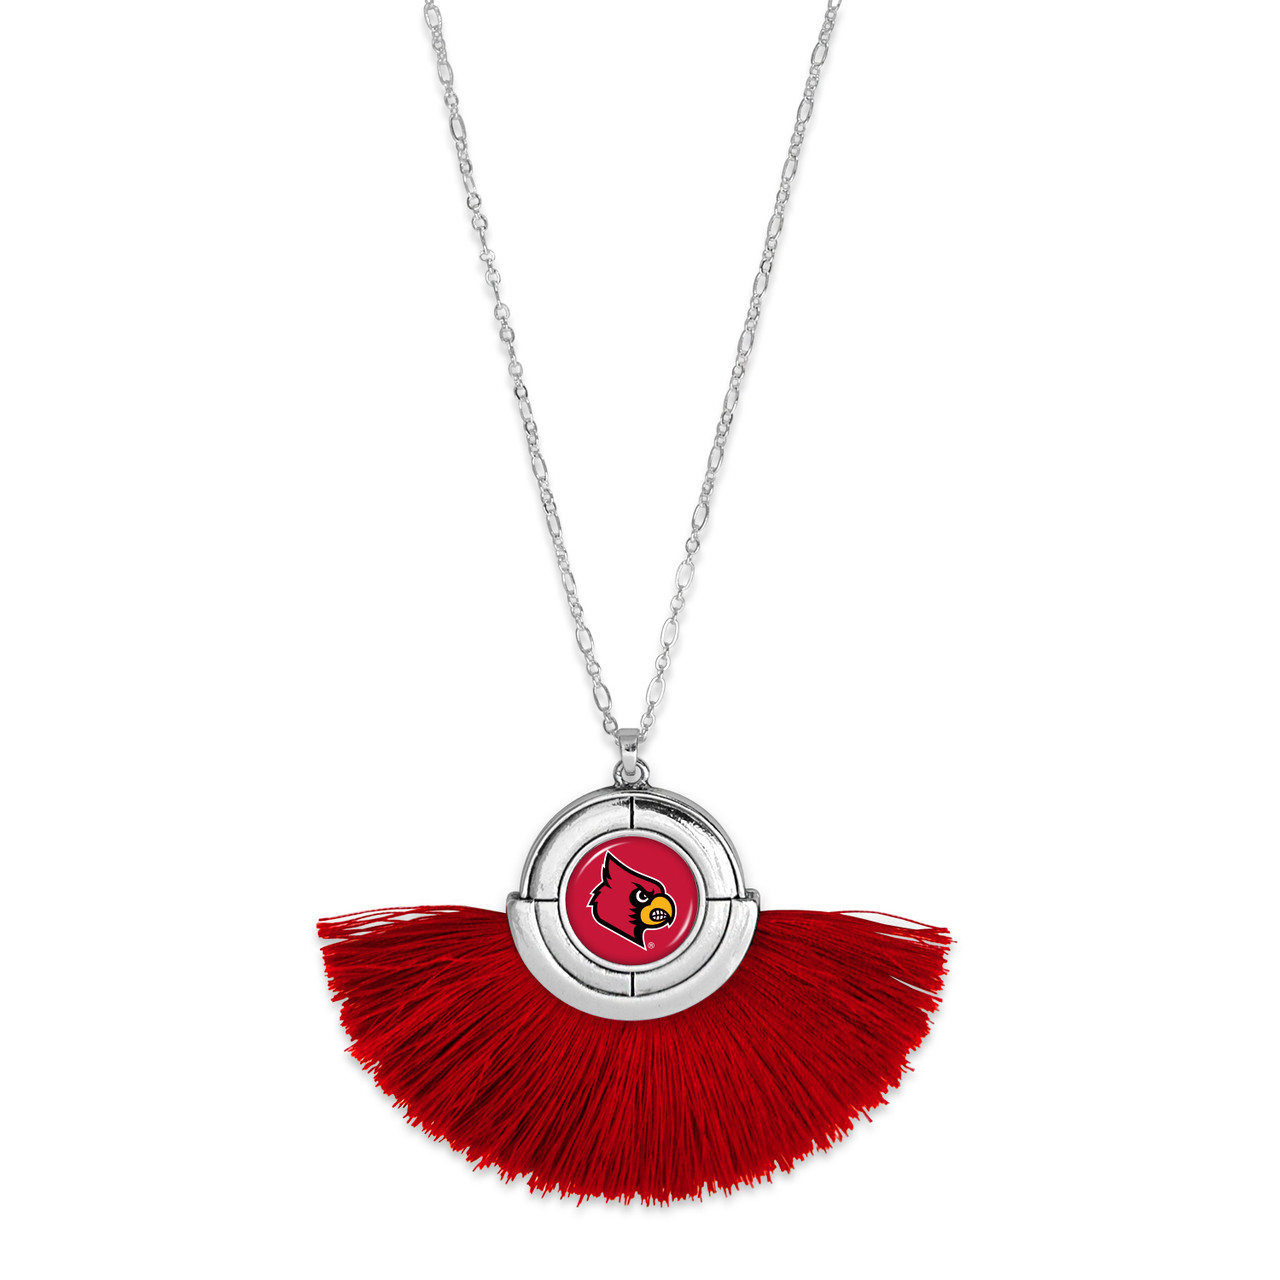 Louisville Cardinals Necklace- No Strings Attached